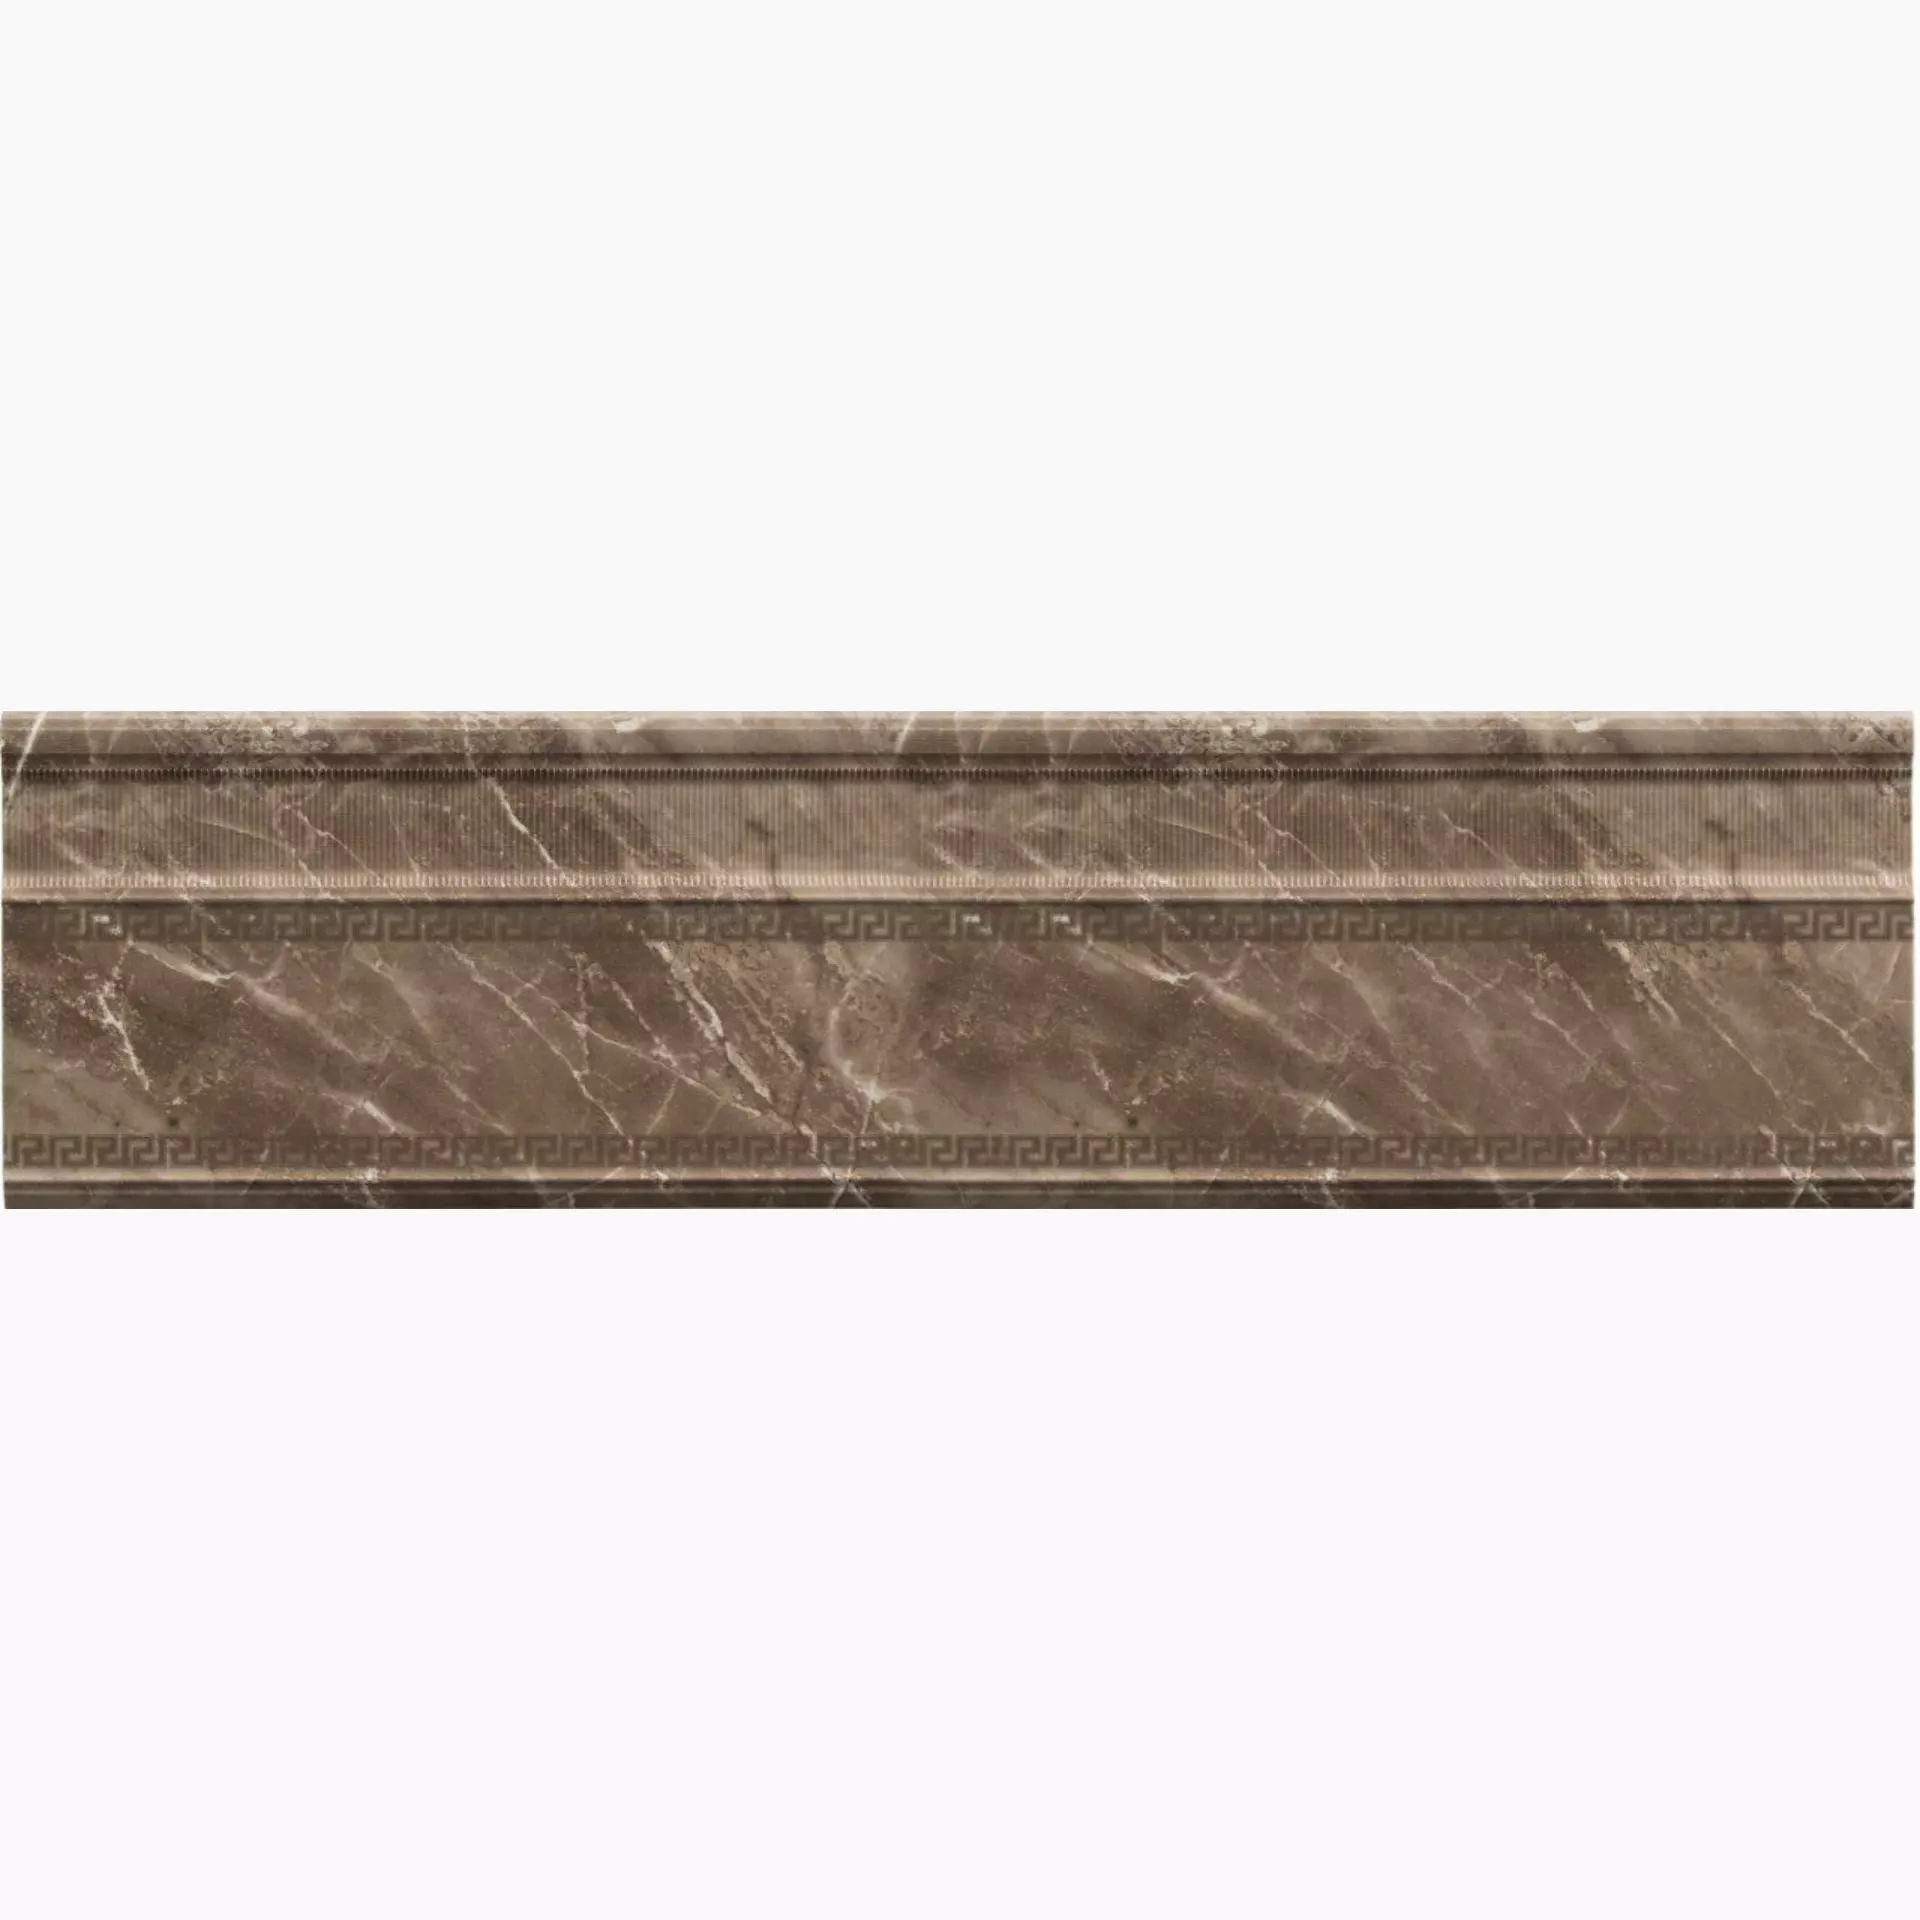 Versace Marble Marrone Naturale Skirting board G0240797 15x58,5cm rectified